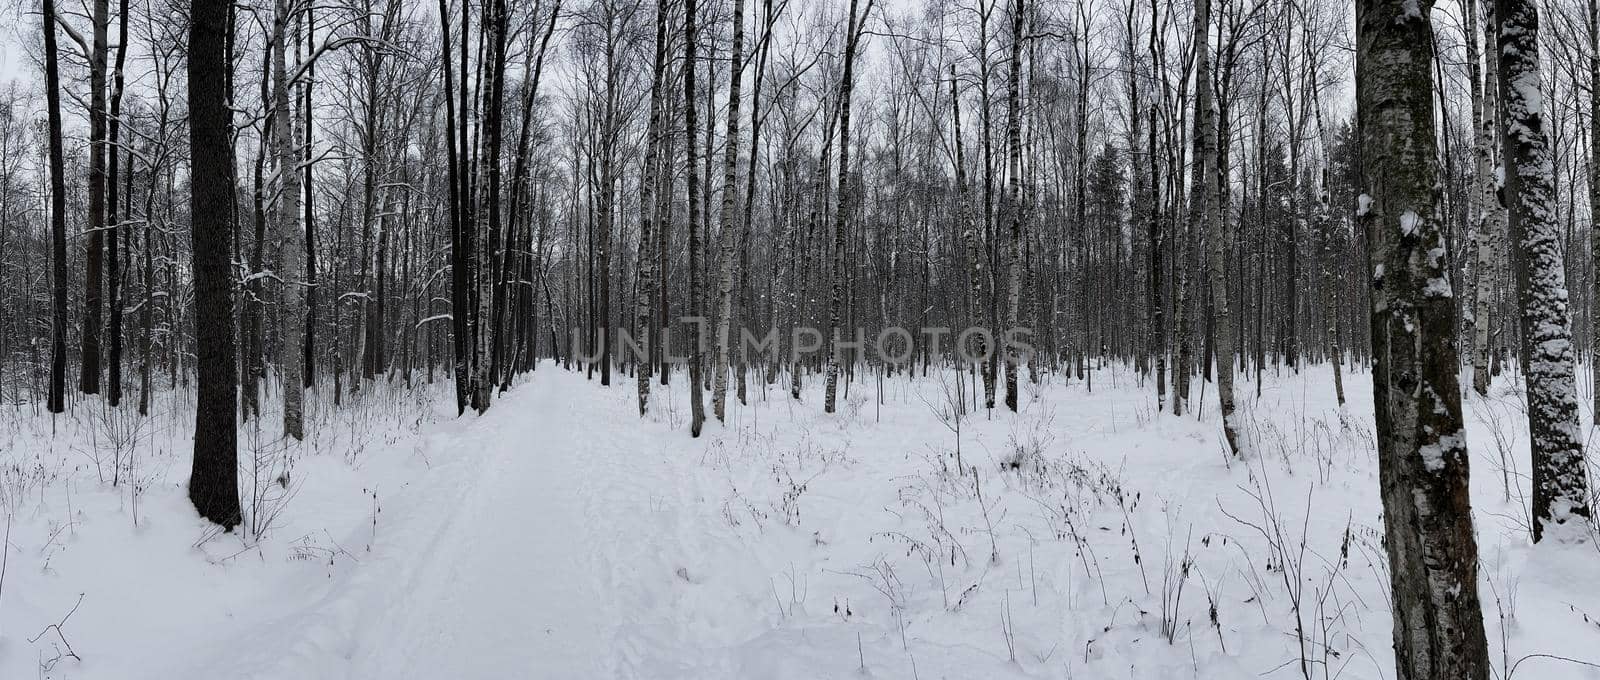 Panoramic image of snow-covered empty forest, black and white birch trunks and other trees, no one in the park, peace and tranquility by vladimirdrozdin